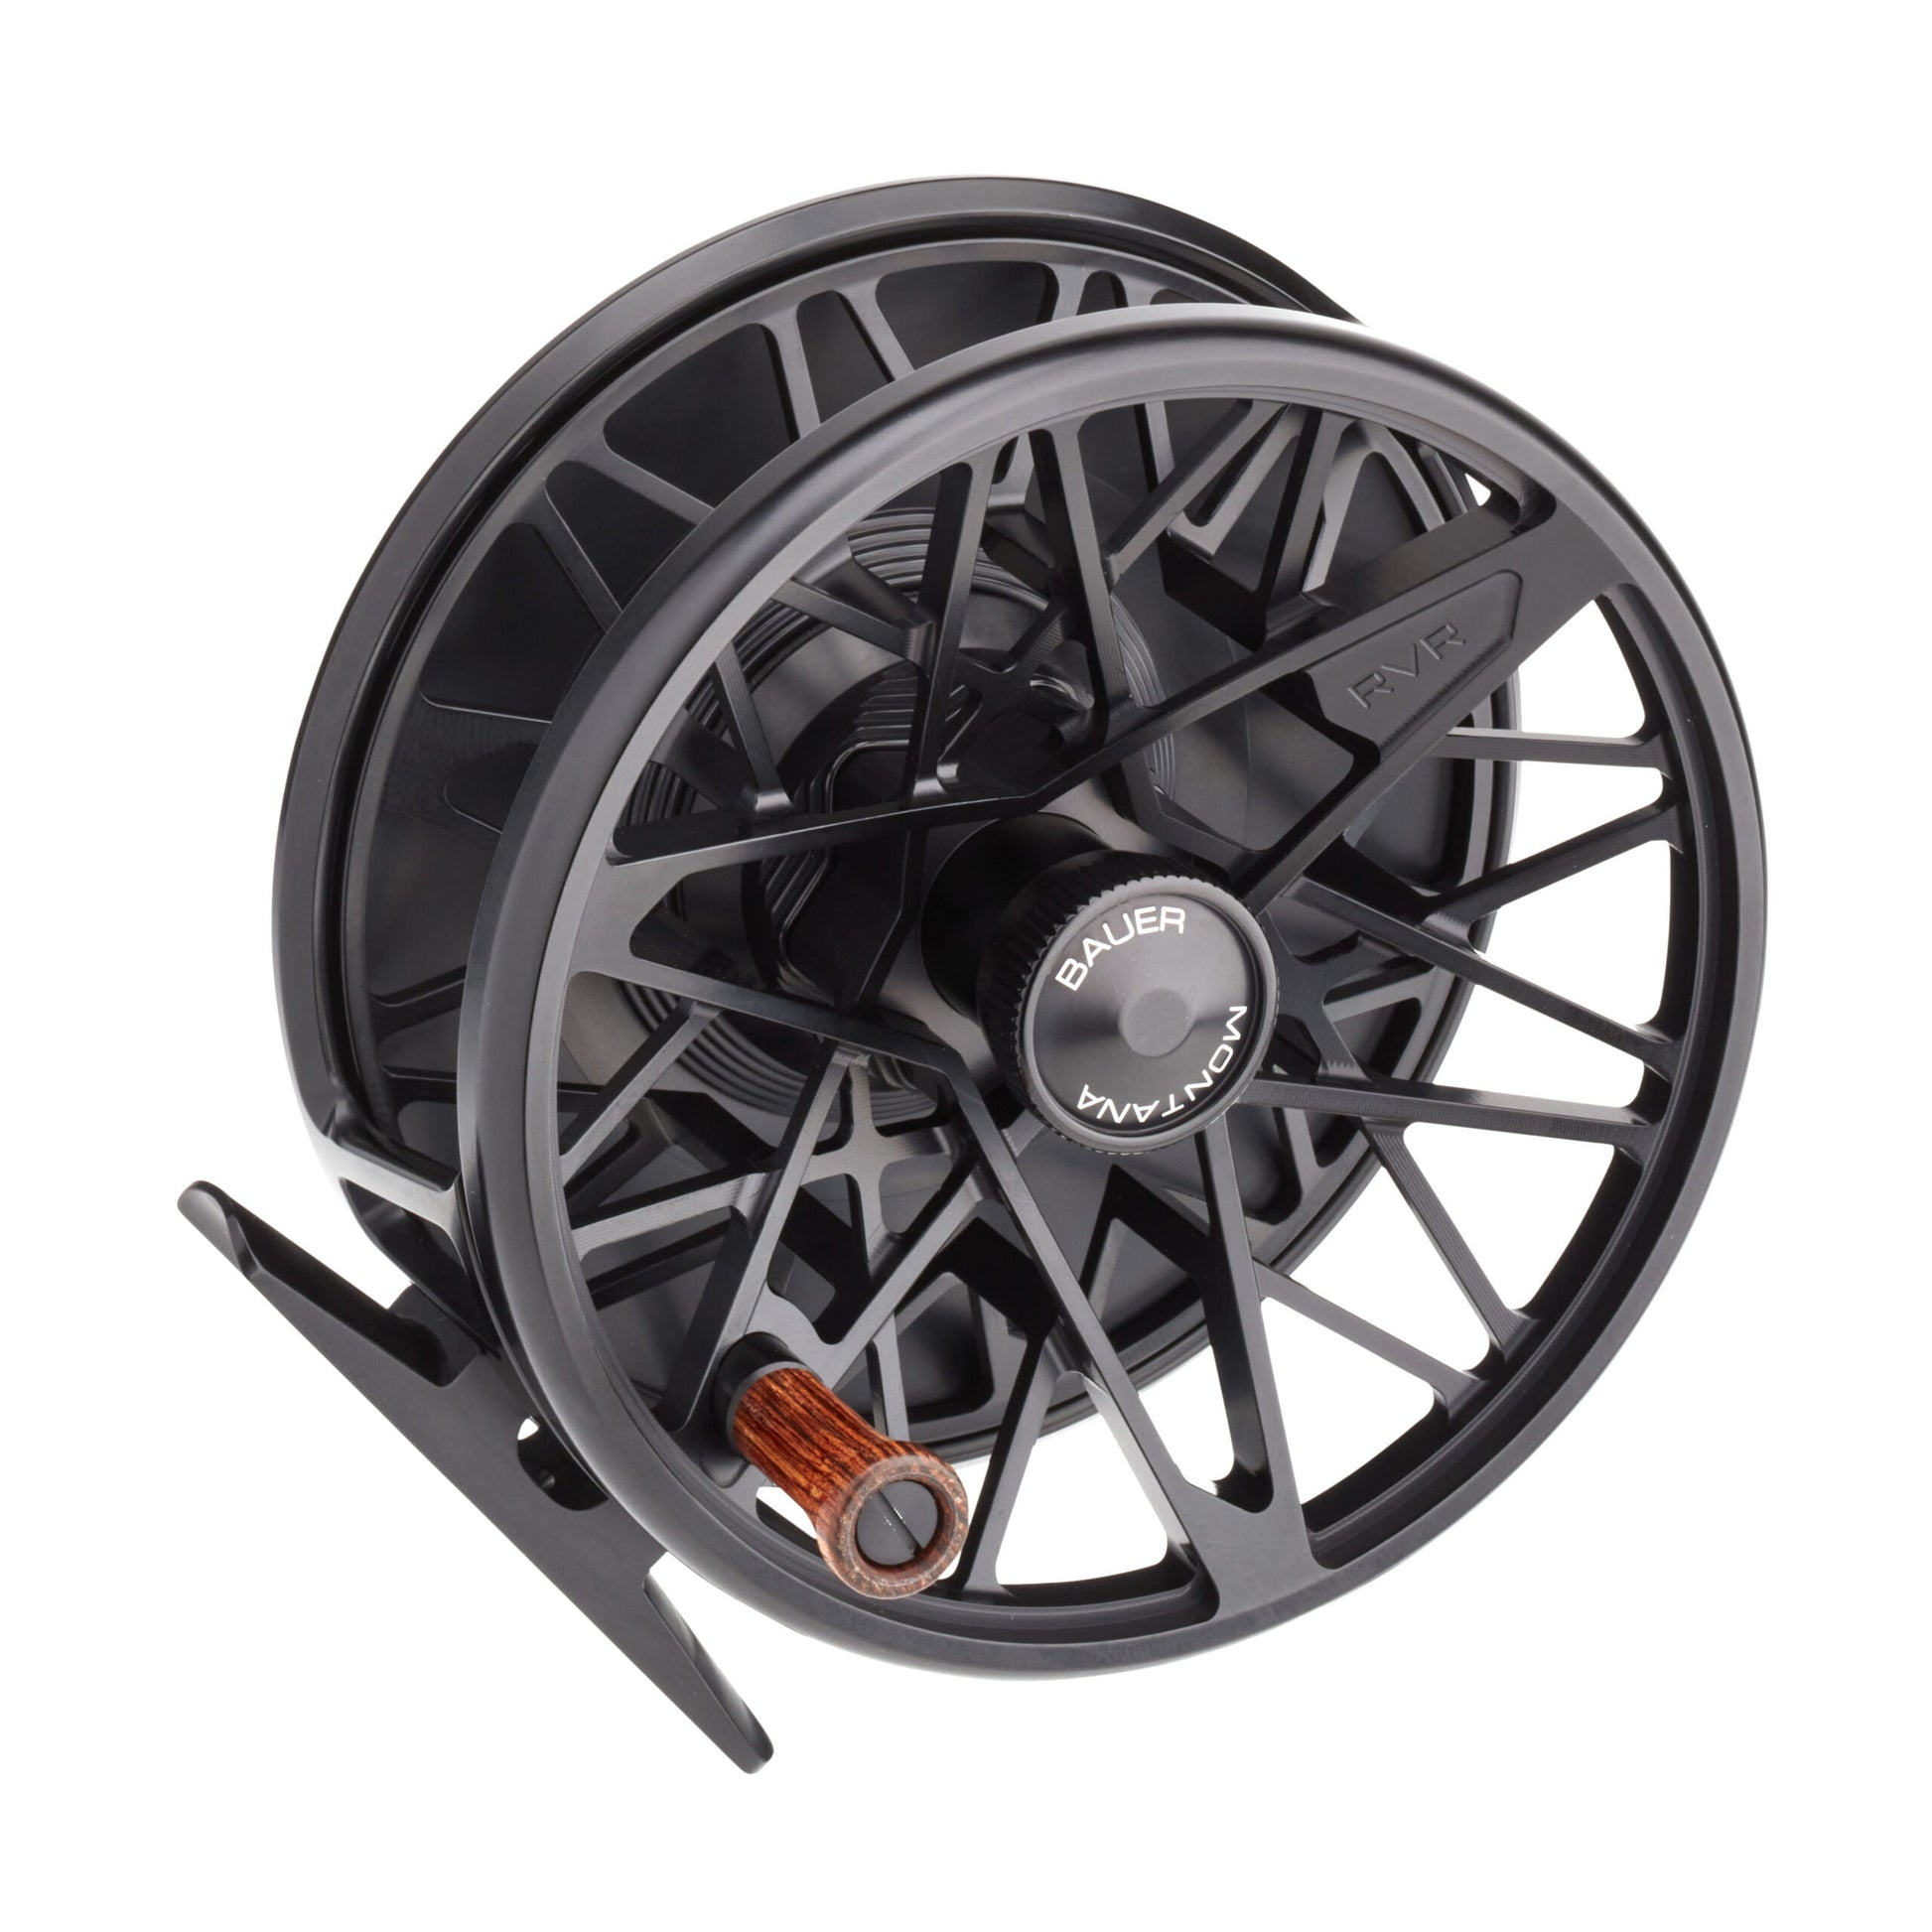 Shop Bauer Fly Fishing Reels – Pheasant Tail Fly Fishing